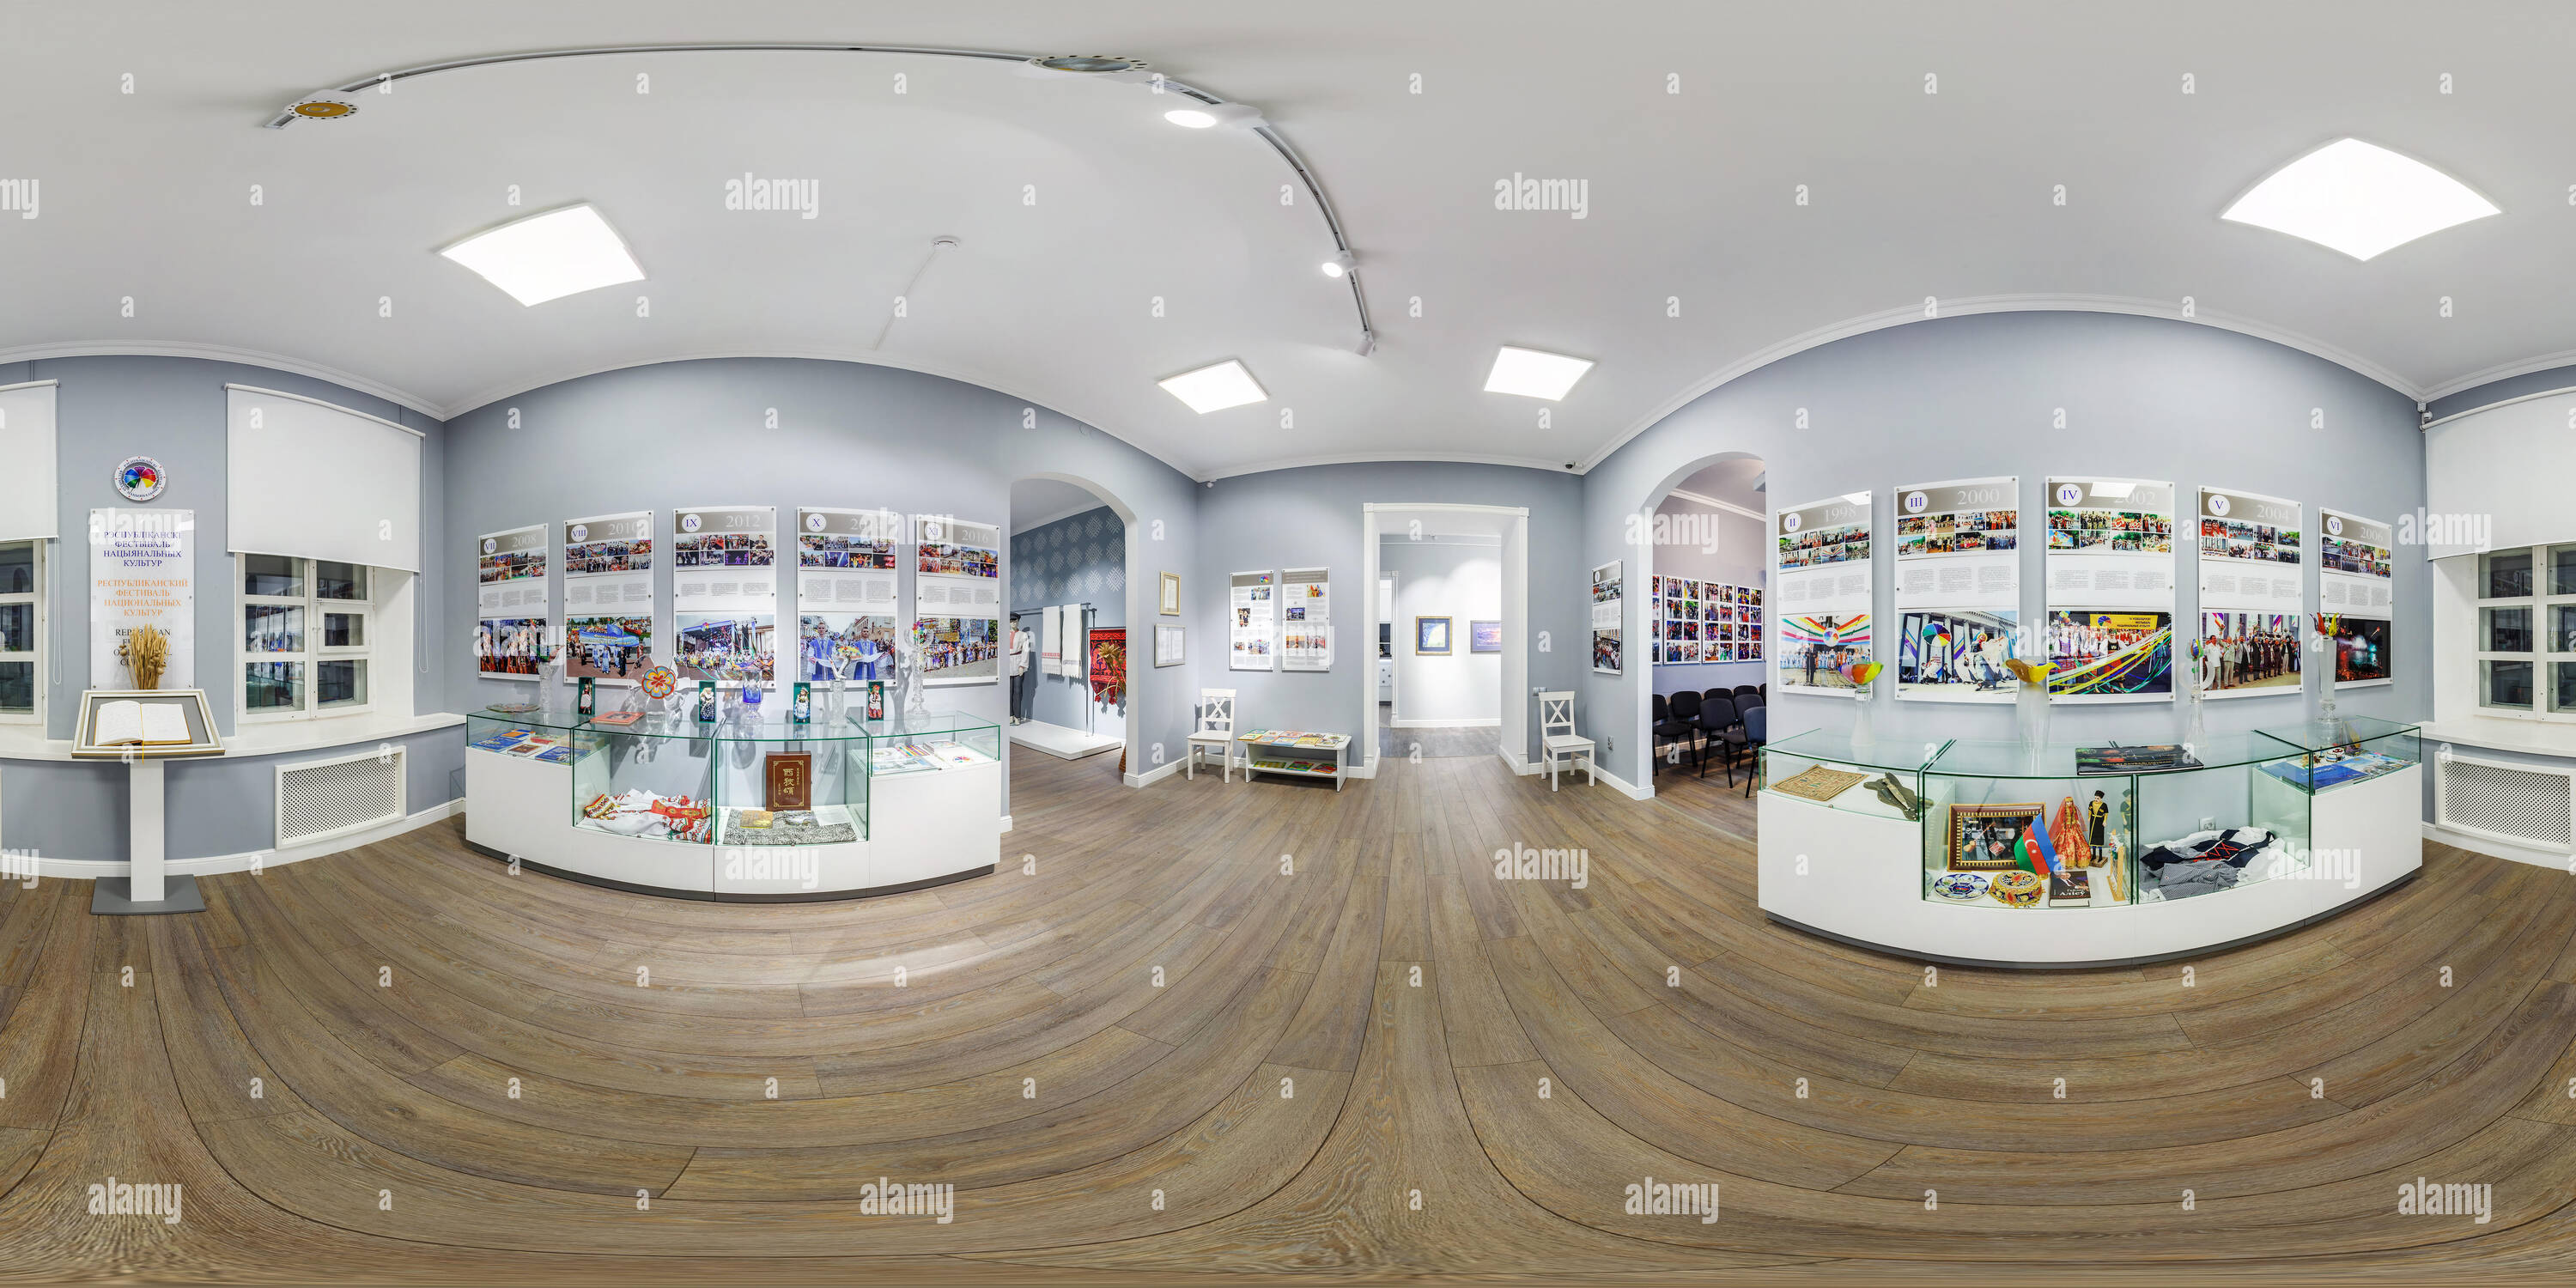 360 degree panoramic view of GRODNO, BELARUS - DECEMBER, 2018: Full seamless hdri spherical panorama 360 degrees angle view in interior museum room in equirectangular equidistant